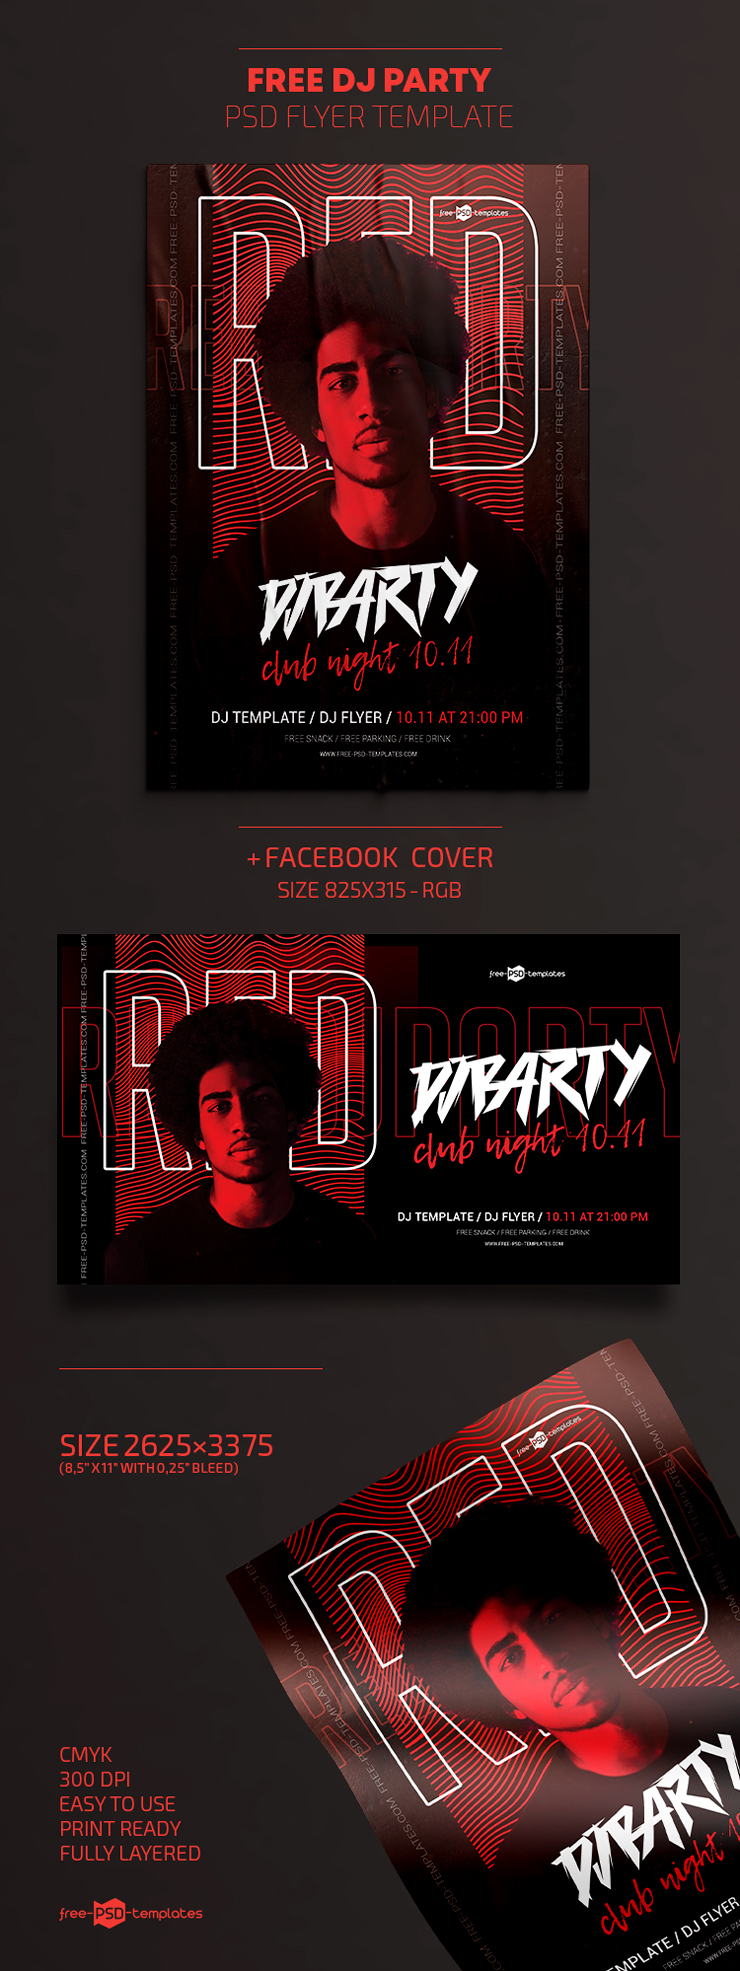 Free Dj Party Flyer Template In Psd Free Psd Templates